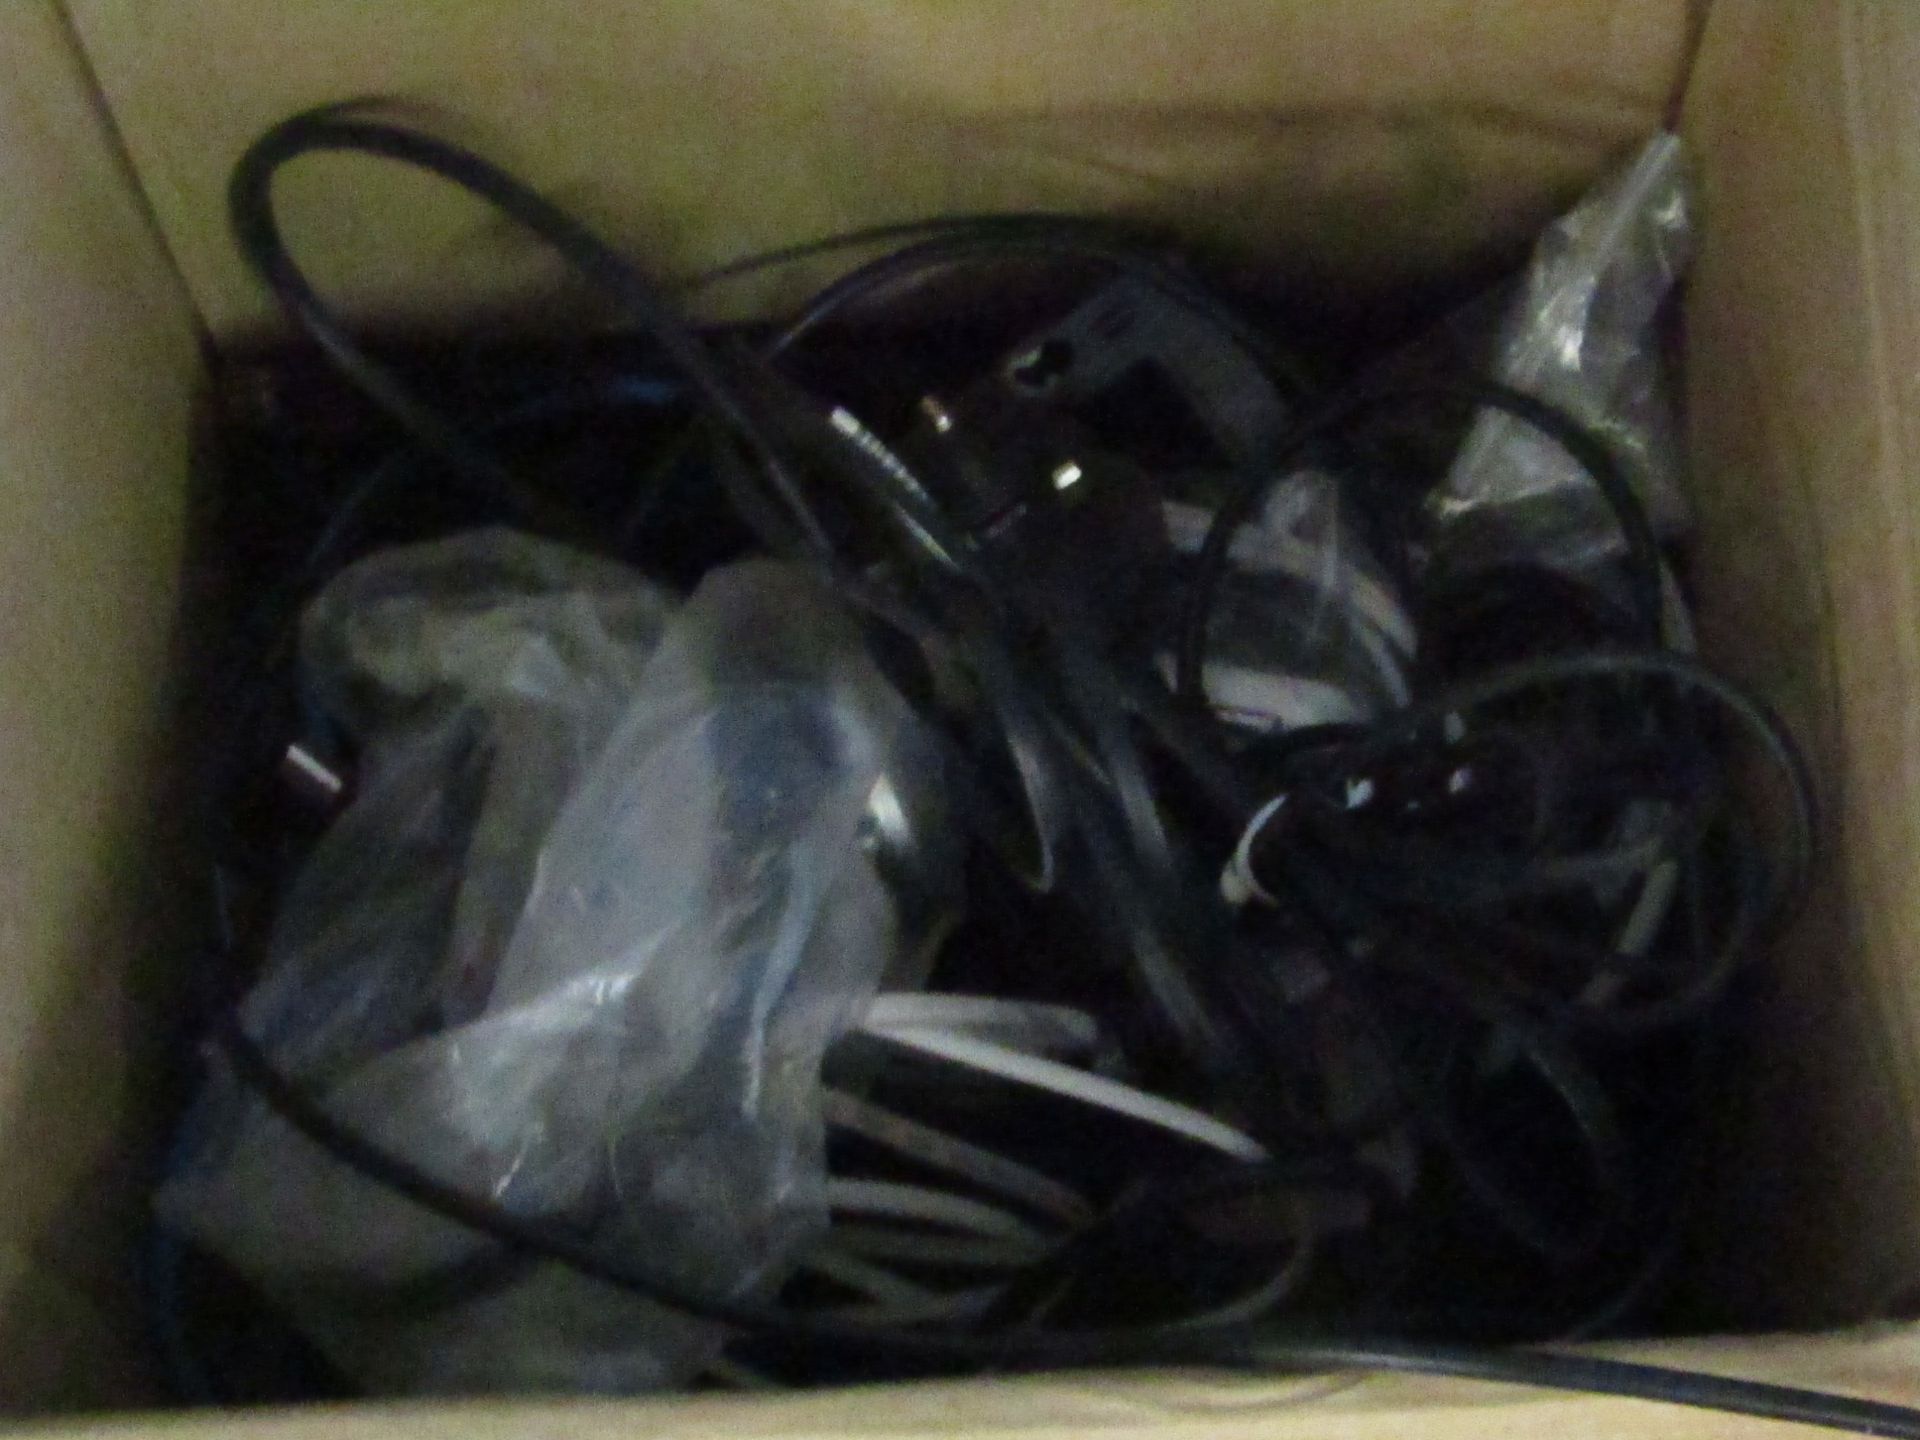 Approx 12x various cables such as USB, power cables and more.